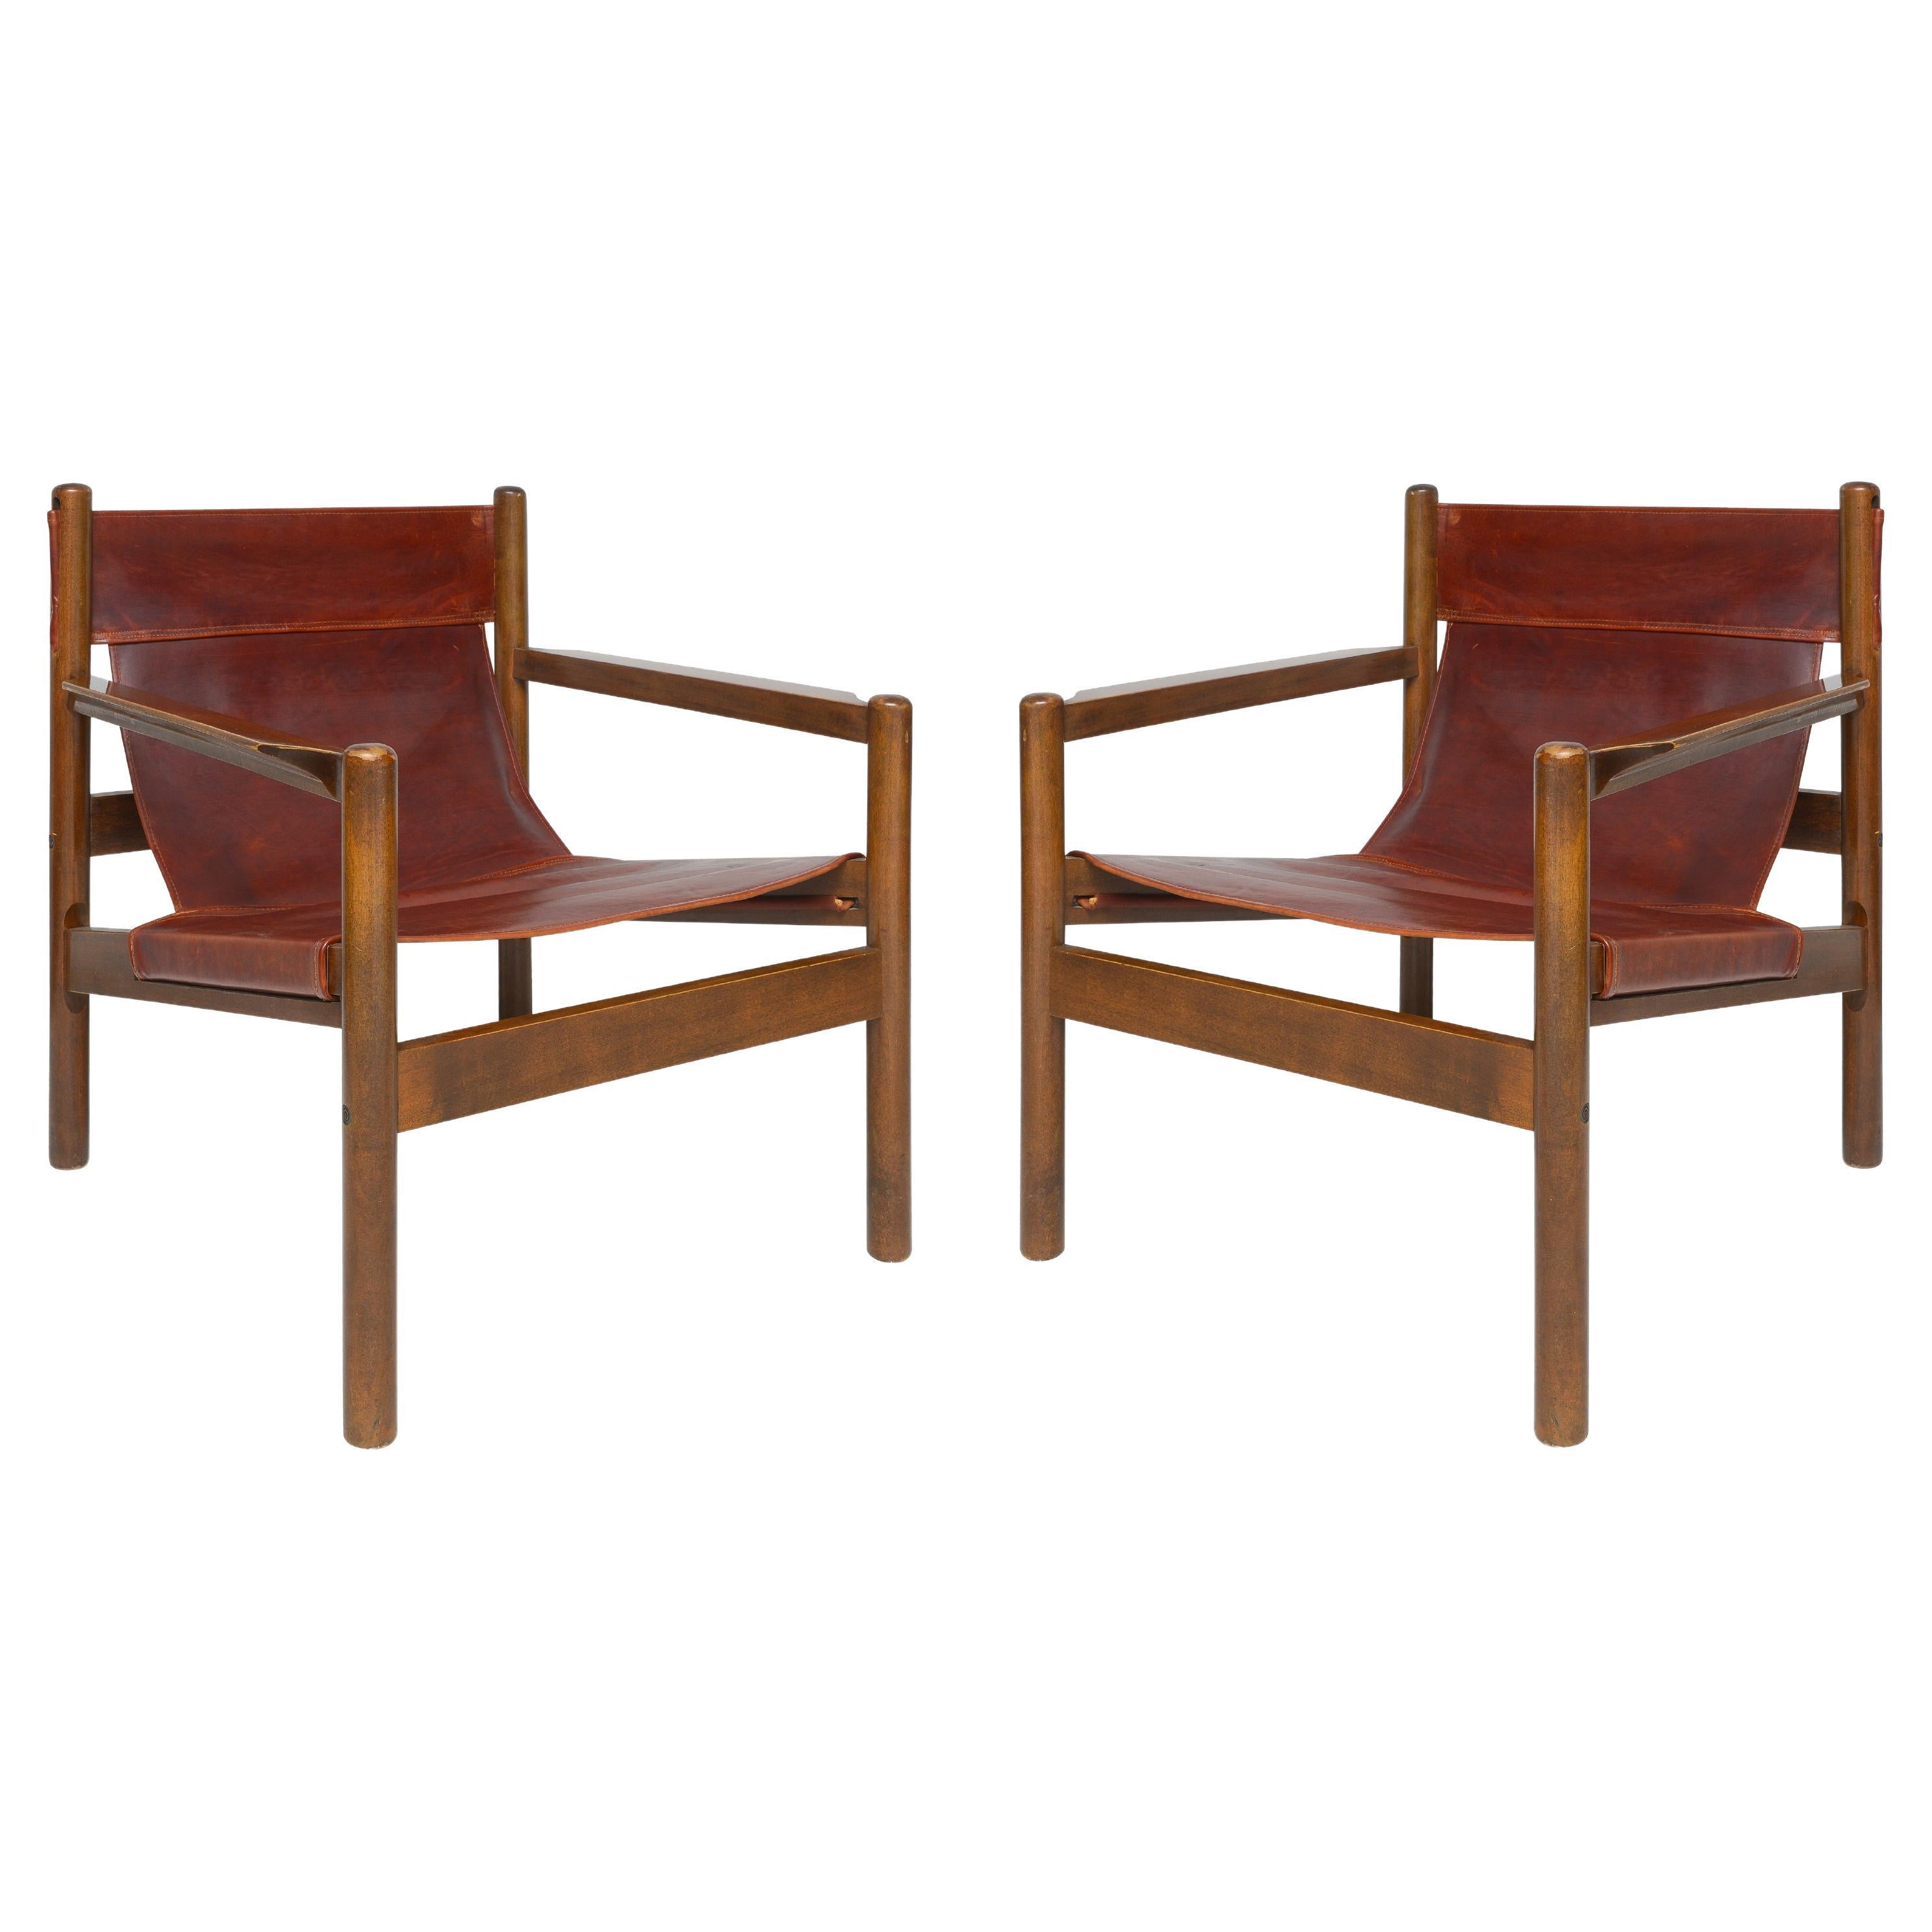  Vintage Pair of Safari-Style Leather Chairs